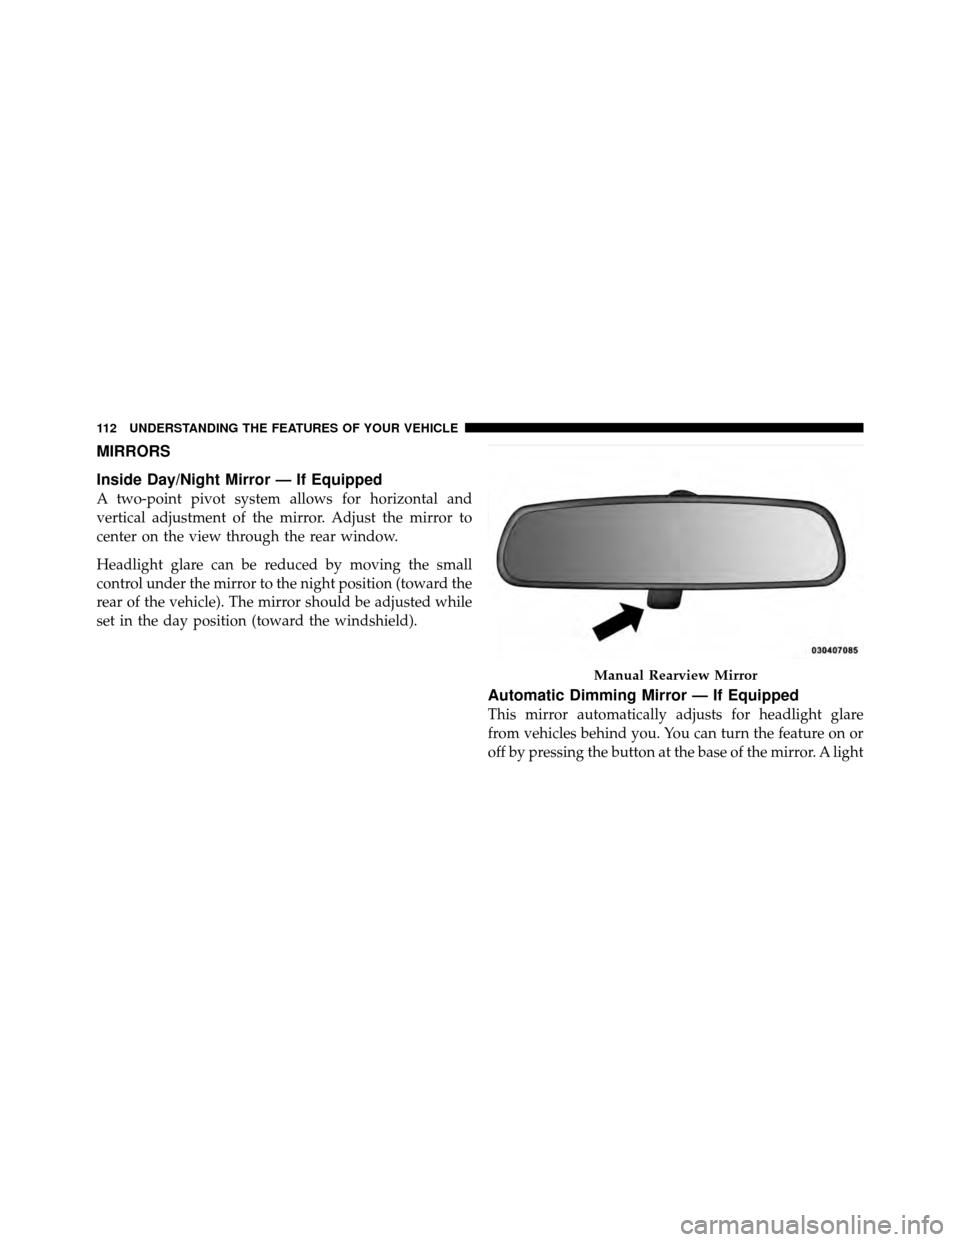 DODGE GRAND CARAVAN 2012 5.G Owners Manual MIRRORS
Inside Day/Night Mirror — If Equipped
A two-point pivot system allows for horizontal and
vertical adjustment of the mirror. Adjust the mirror to
center on the view through the rear window.
H